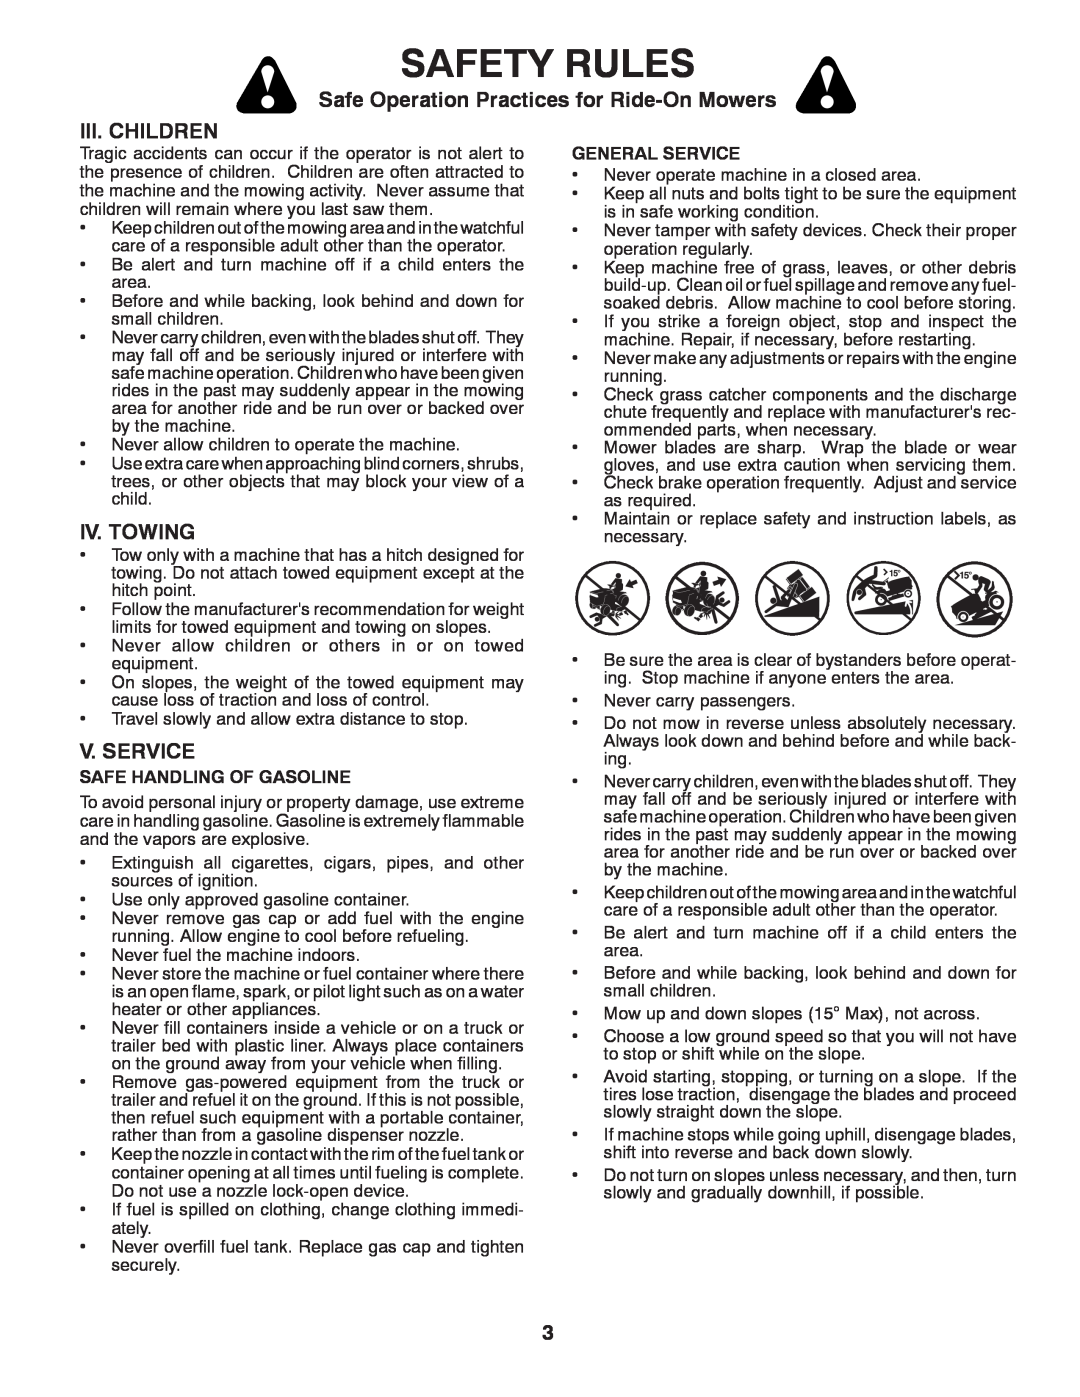 McCulloch MC2042YT manual Iii. Children, Iv. Towing, V. Service, Safety Rules, Safe Operation Practices for Ride-OnMowers 